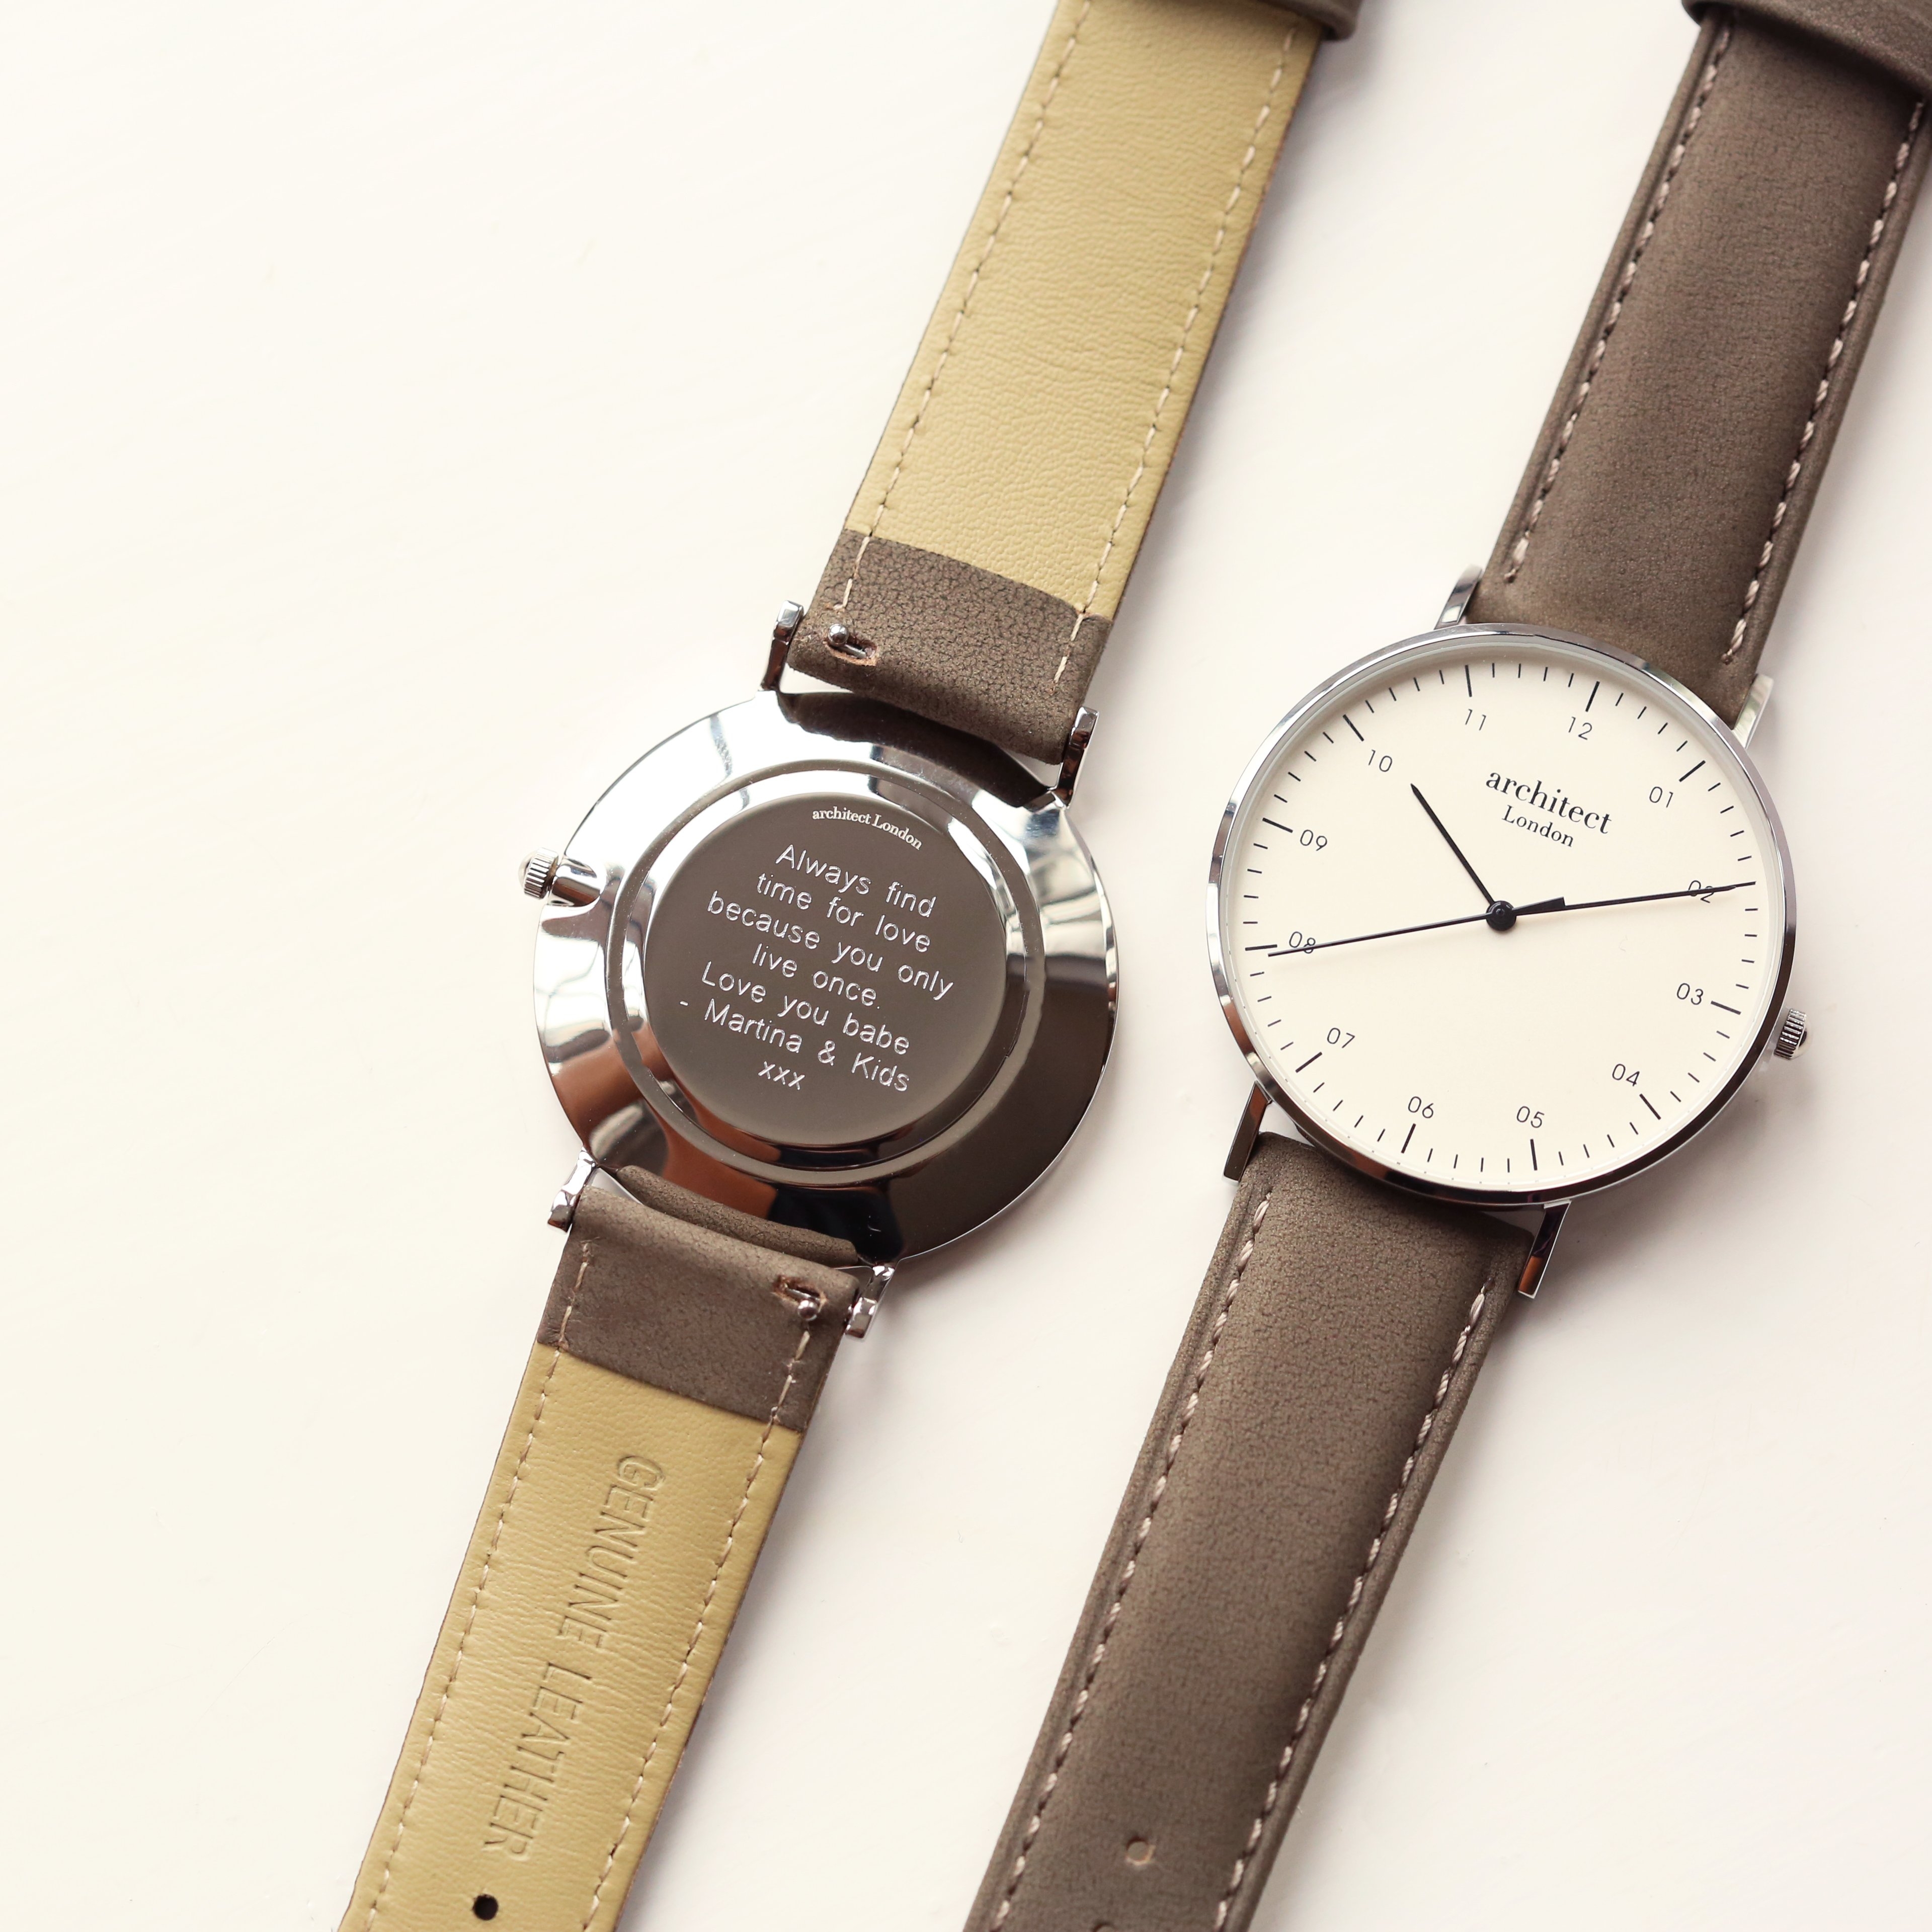 Modern Font Engraving – Men’s Architect Zephyr – Urban Grey Strap – Genuine Leather / Stainless Steel – Architect Watches